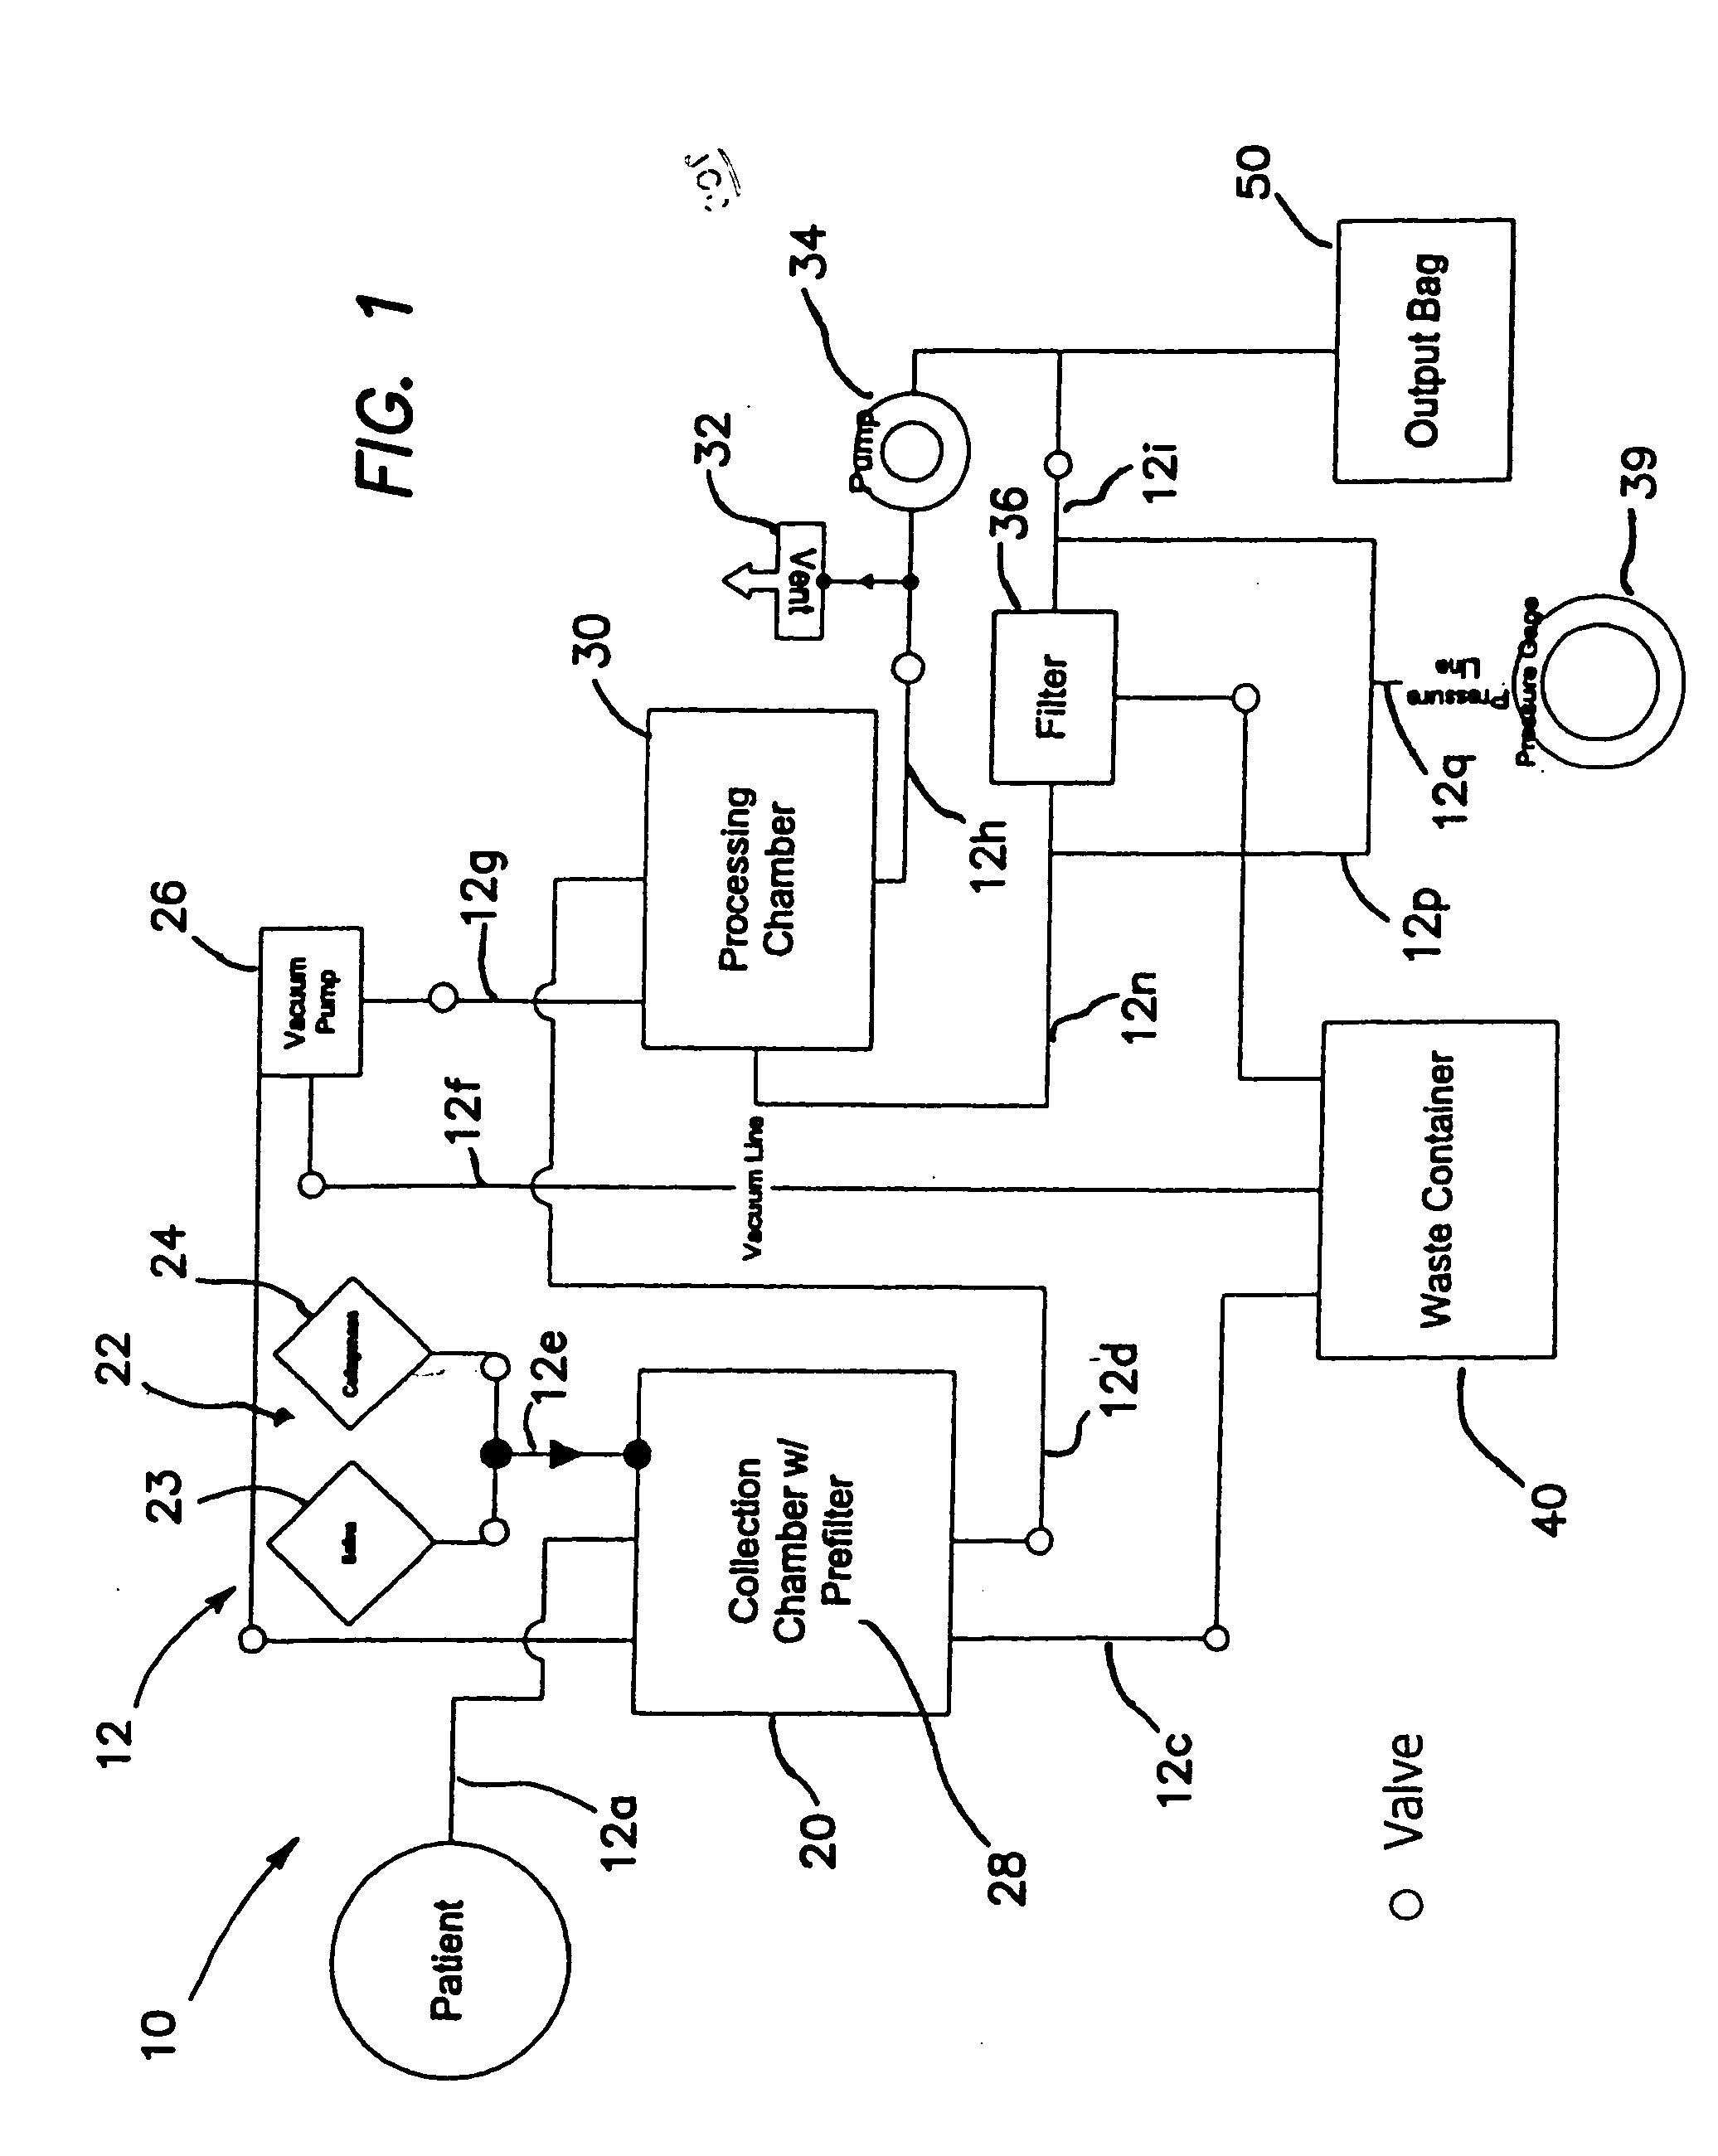 Methods of using regenerative cells in the treatment of peripheral vascular disease and related disorders